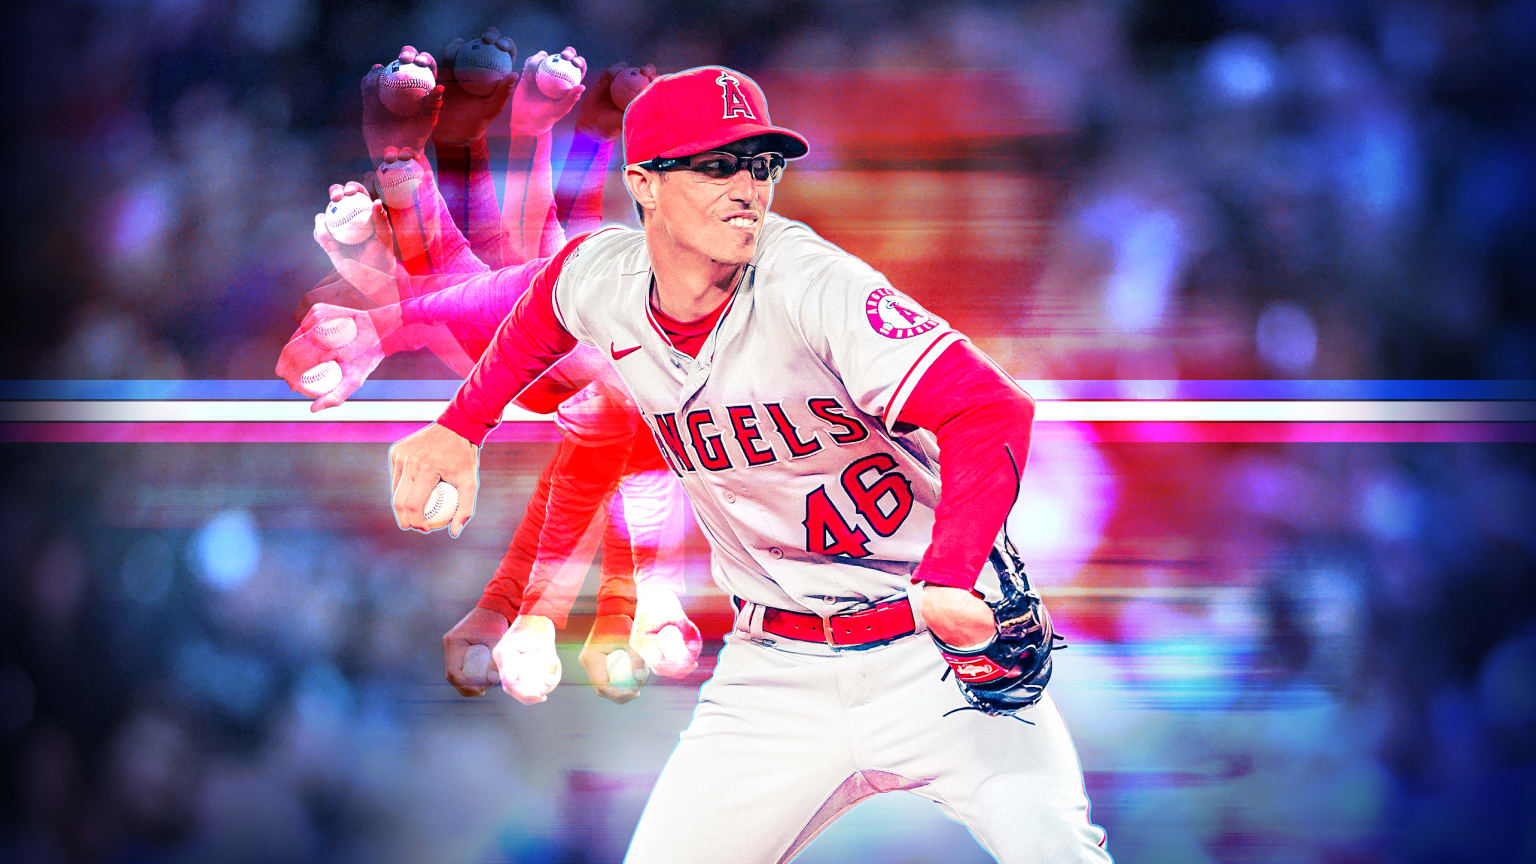 A photo illustration of Jimmy Herget pitching with multiple arms extending from his body